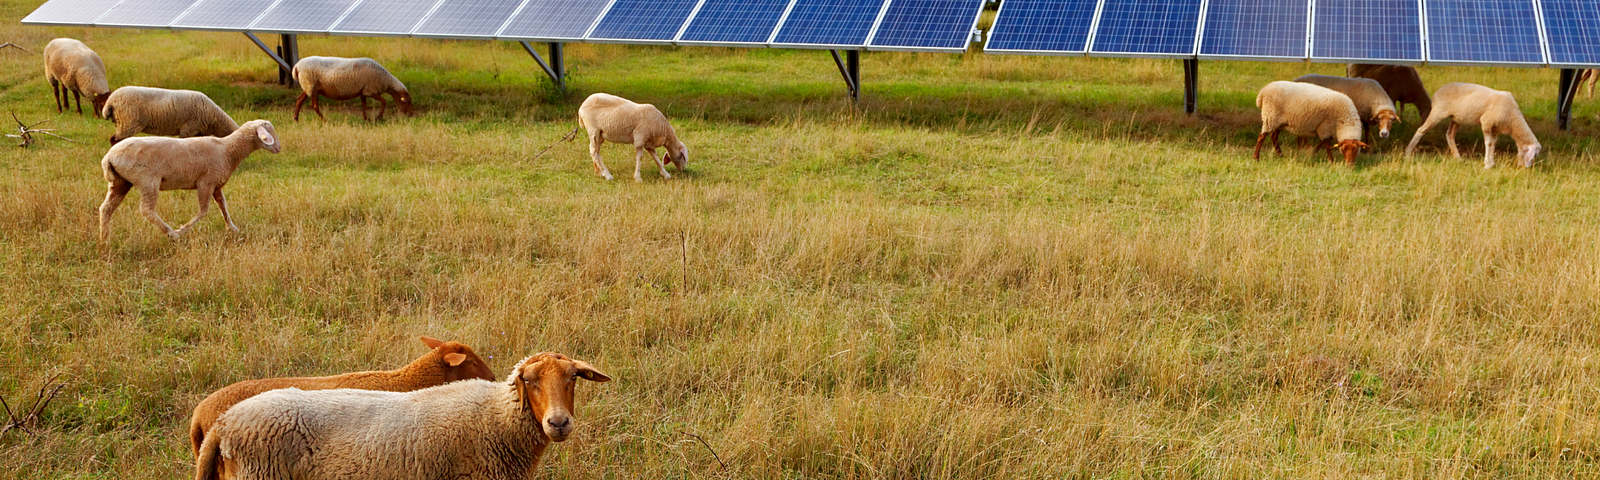 Photo of sheep grazing around an array of solar panels, located in a grassy field